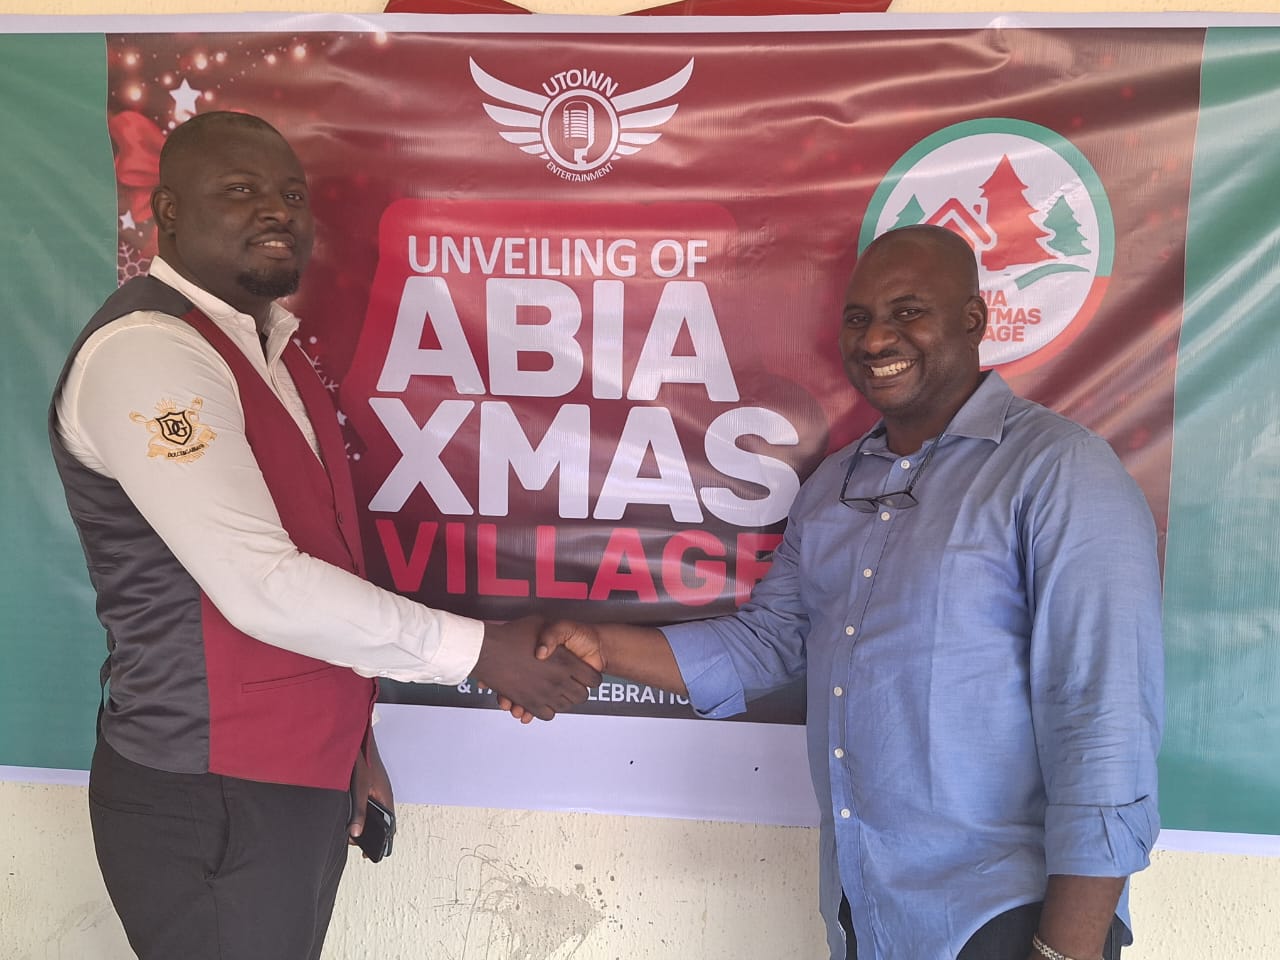 Abia Christmas Village Project Manager - Emenike Iroegbu with the CEO Hireme Africa Tobi Emmanuel